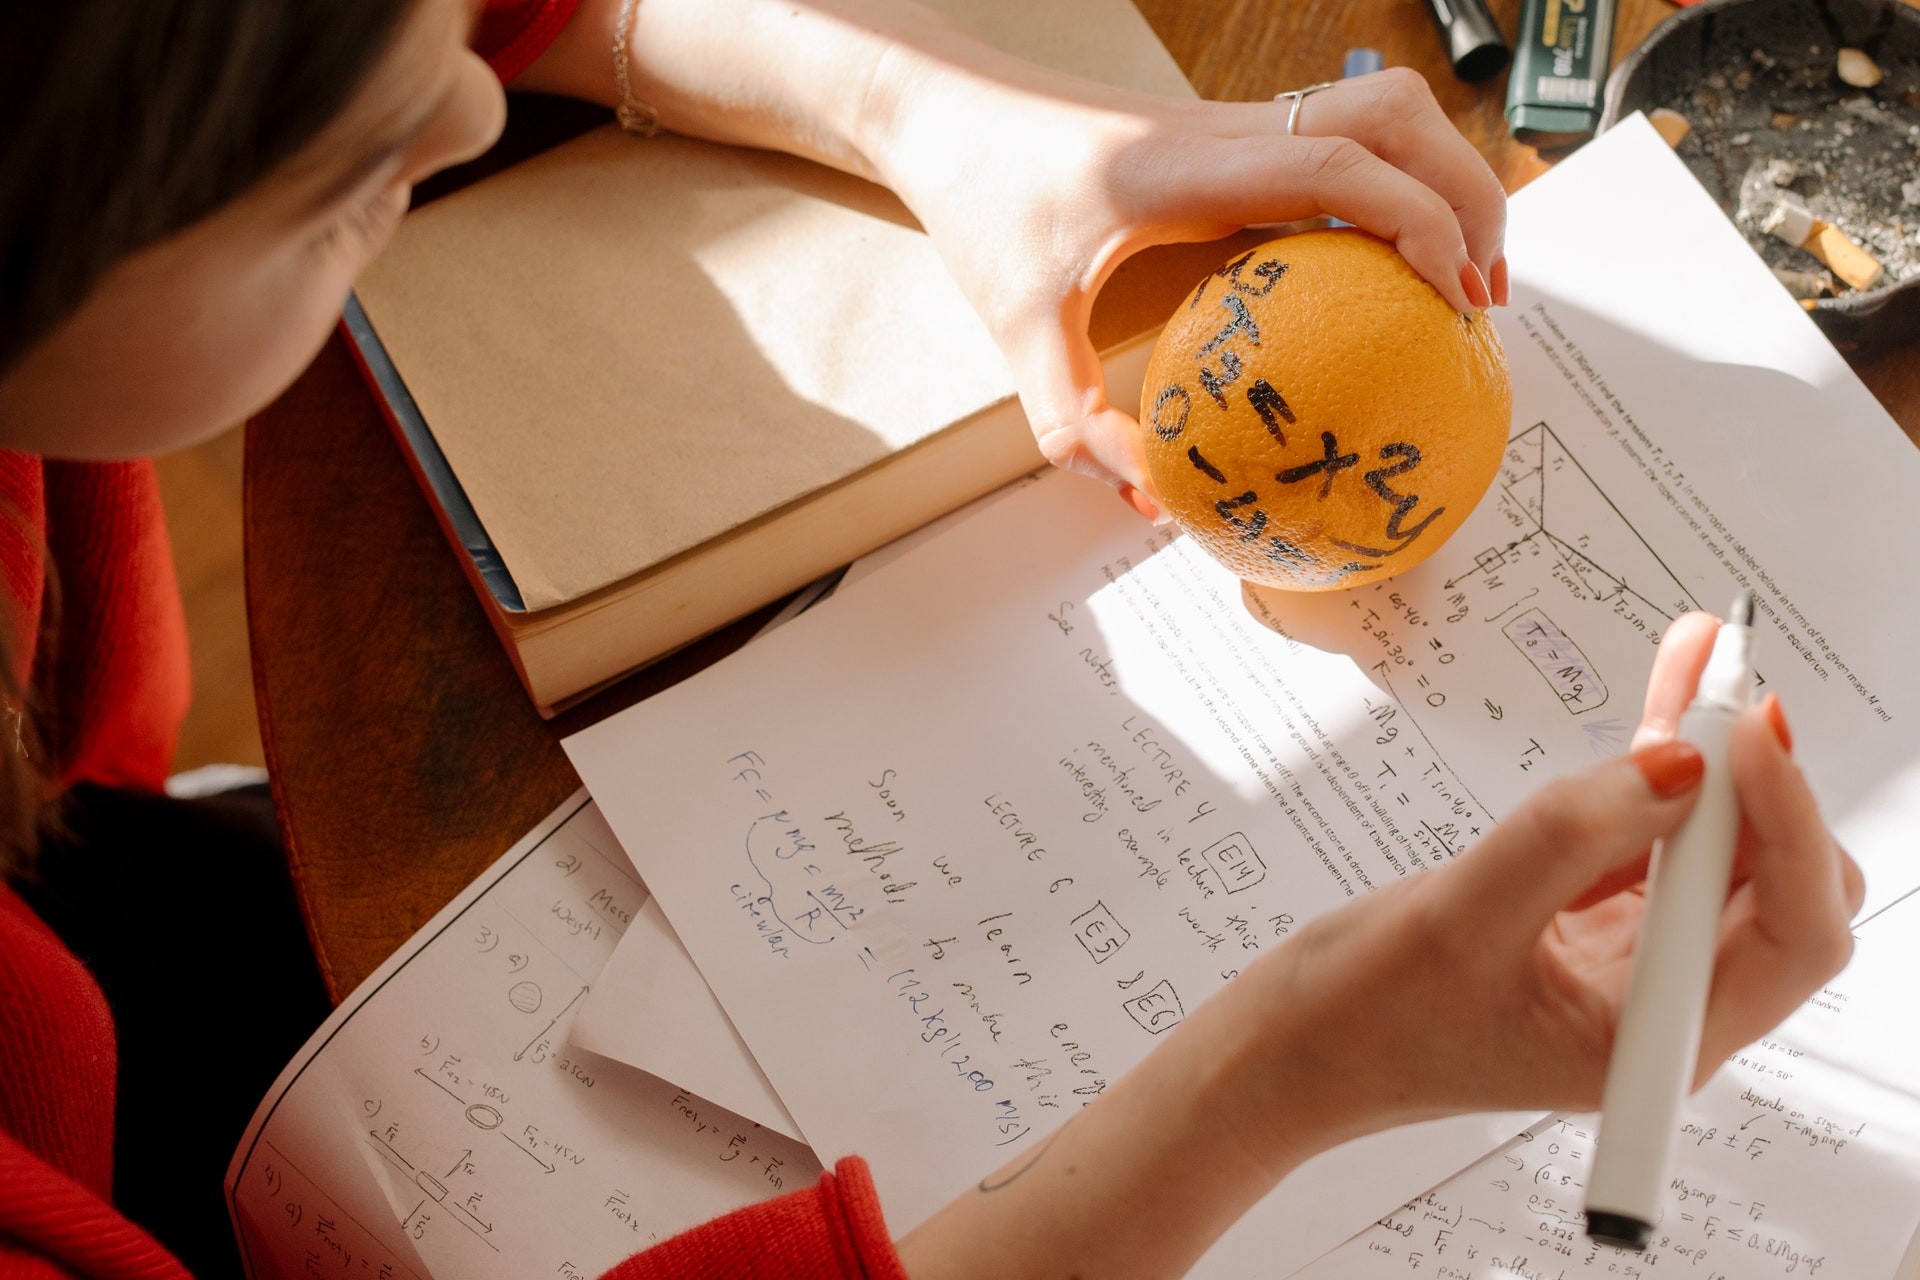 A student holds an orange with an equation written on it while working on a math writing prompt.